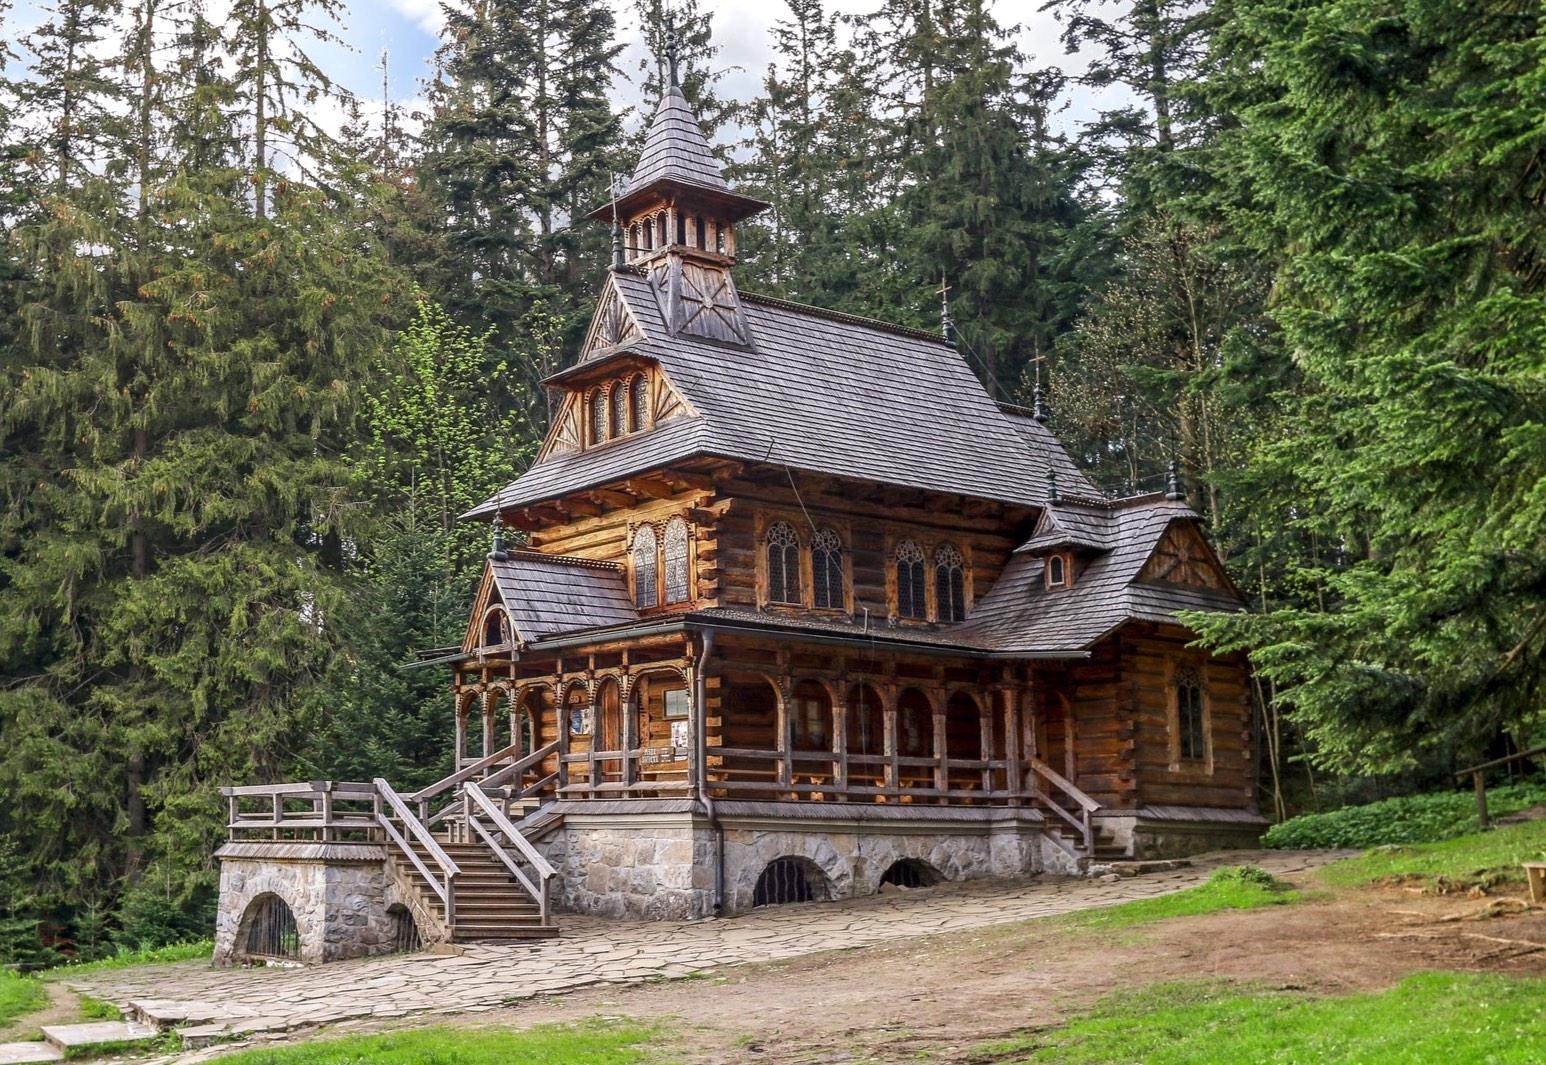 Jaszczurówka Chapel was built at the beginning of the 20th century in the Zakopane style, without using nails. The interior decor and ornaments are masterpieces of wood craftsmanship. – © Agnes Kantaruk